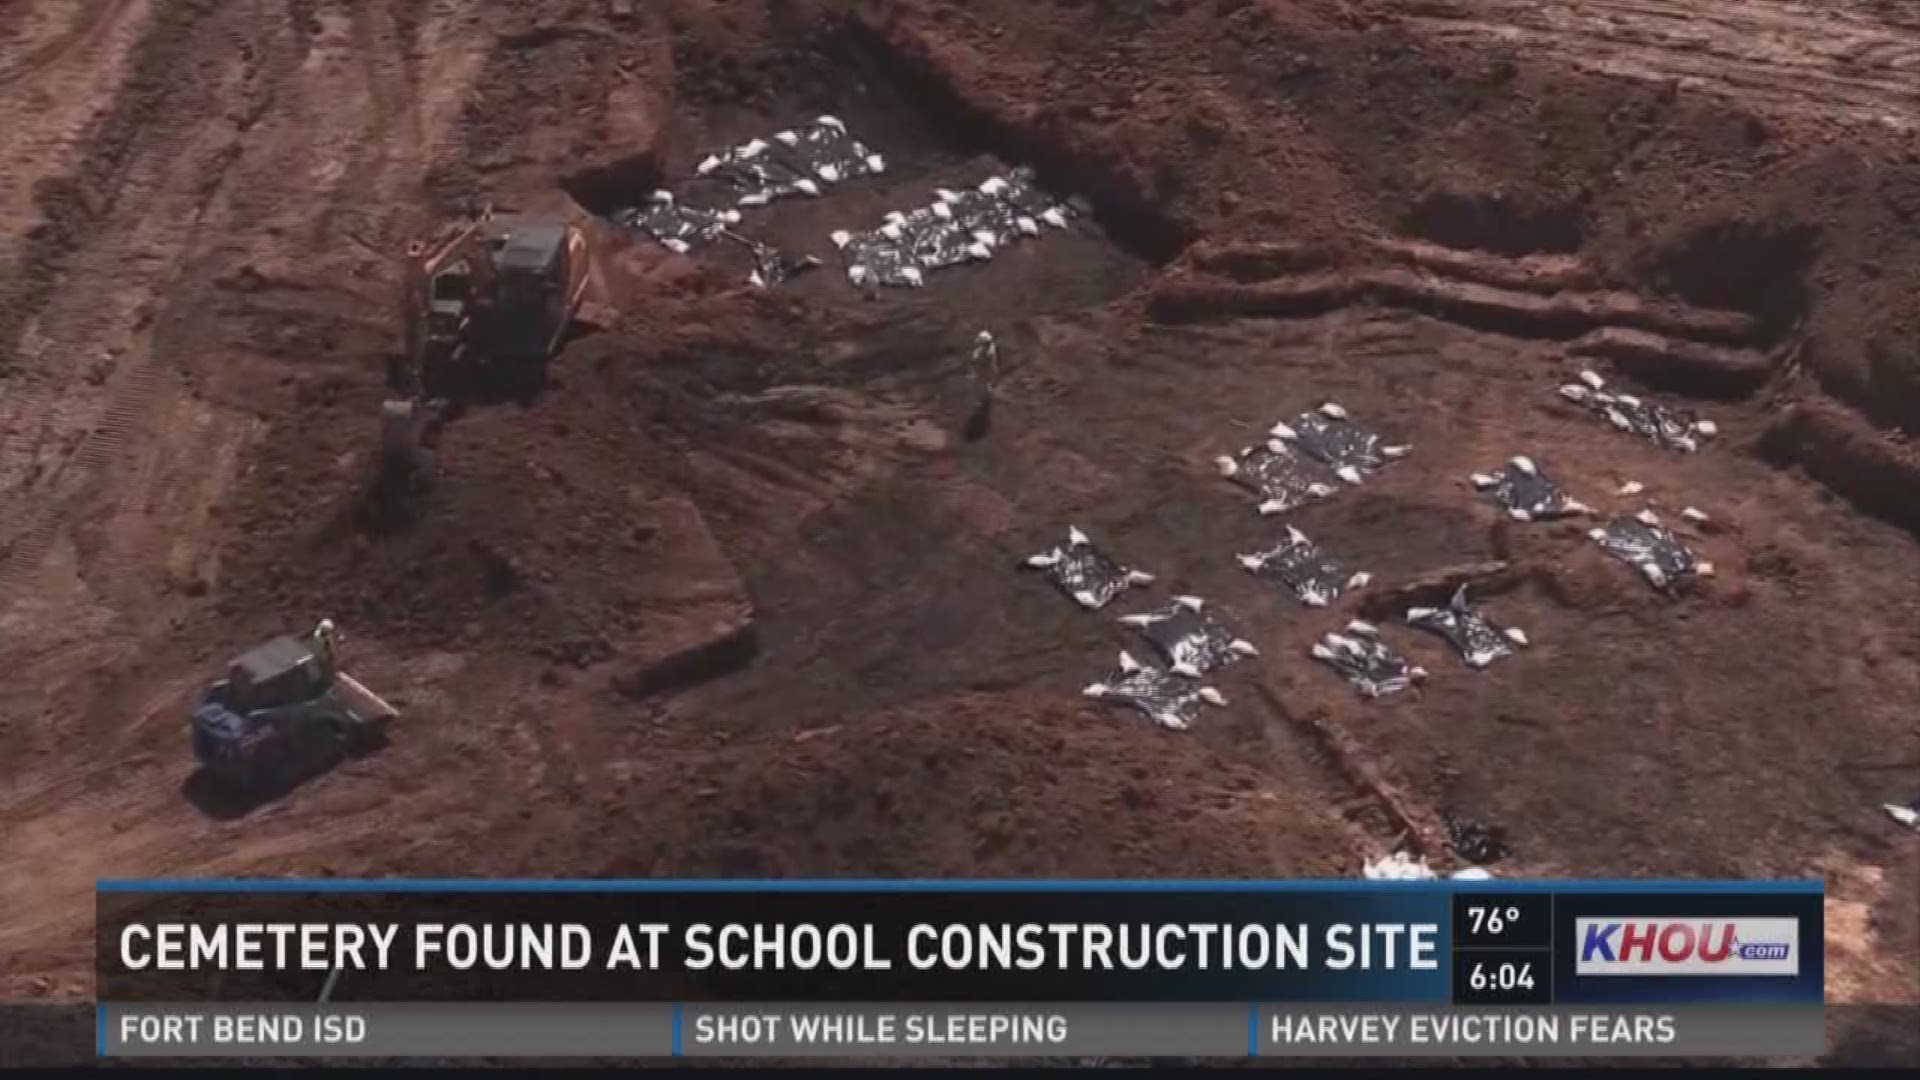 Fort Bend ISD and the Texas Historical Commission are working together after a historic cemetery was found at a school construction site.